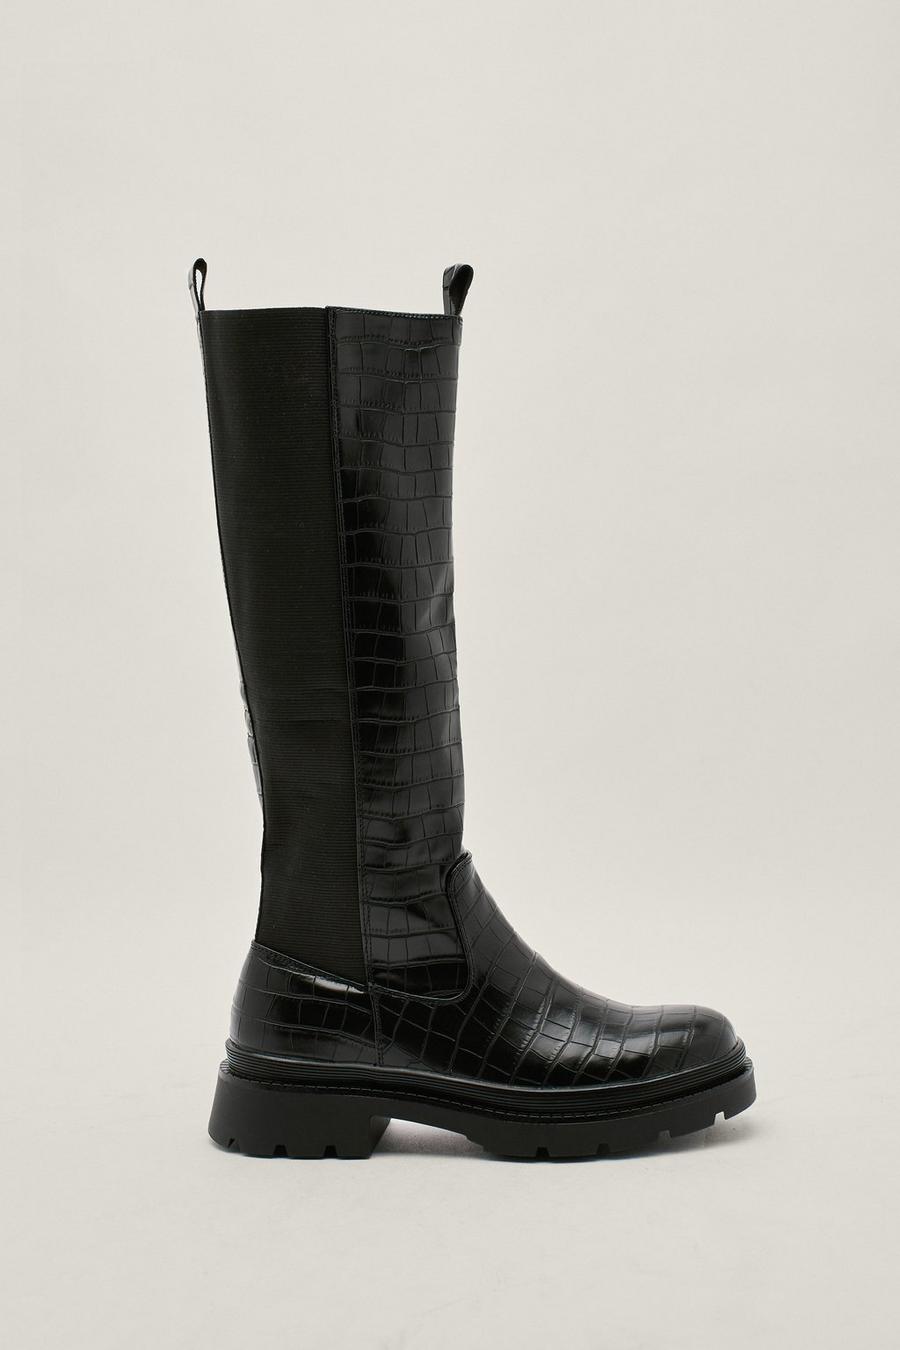 Croc Faux Leather Calf High Boots